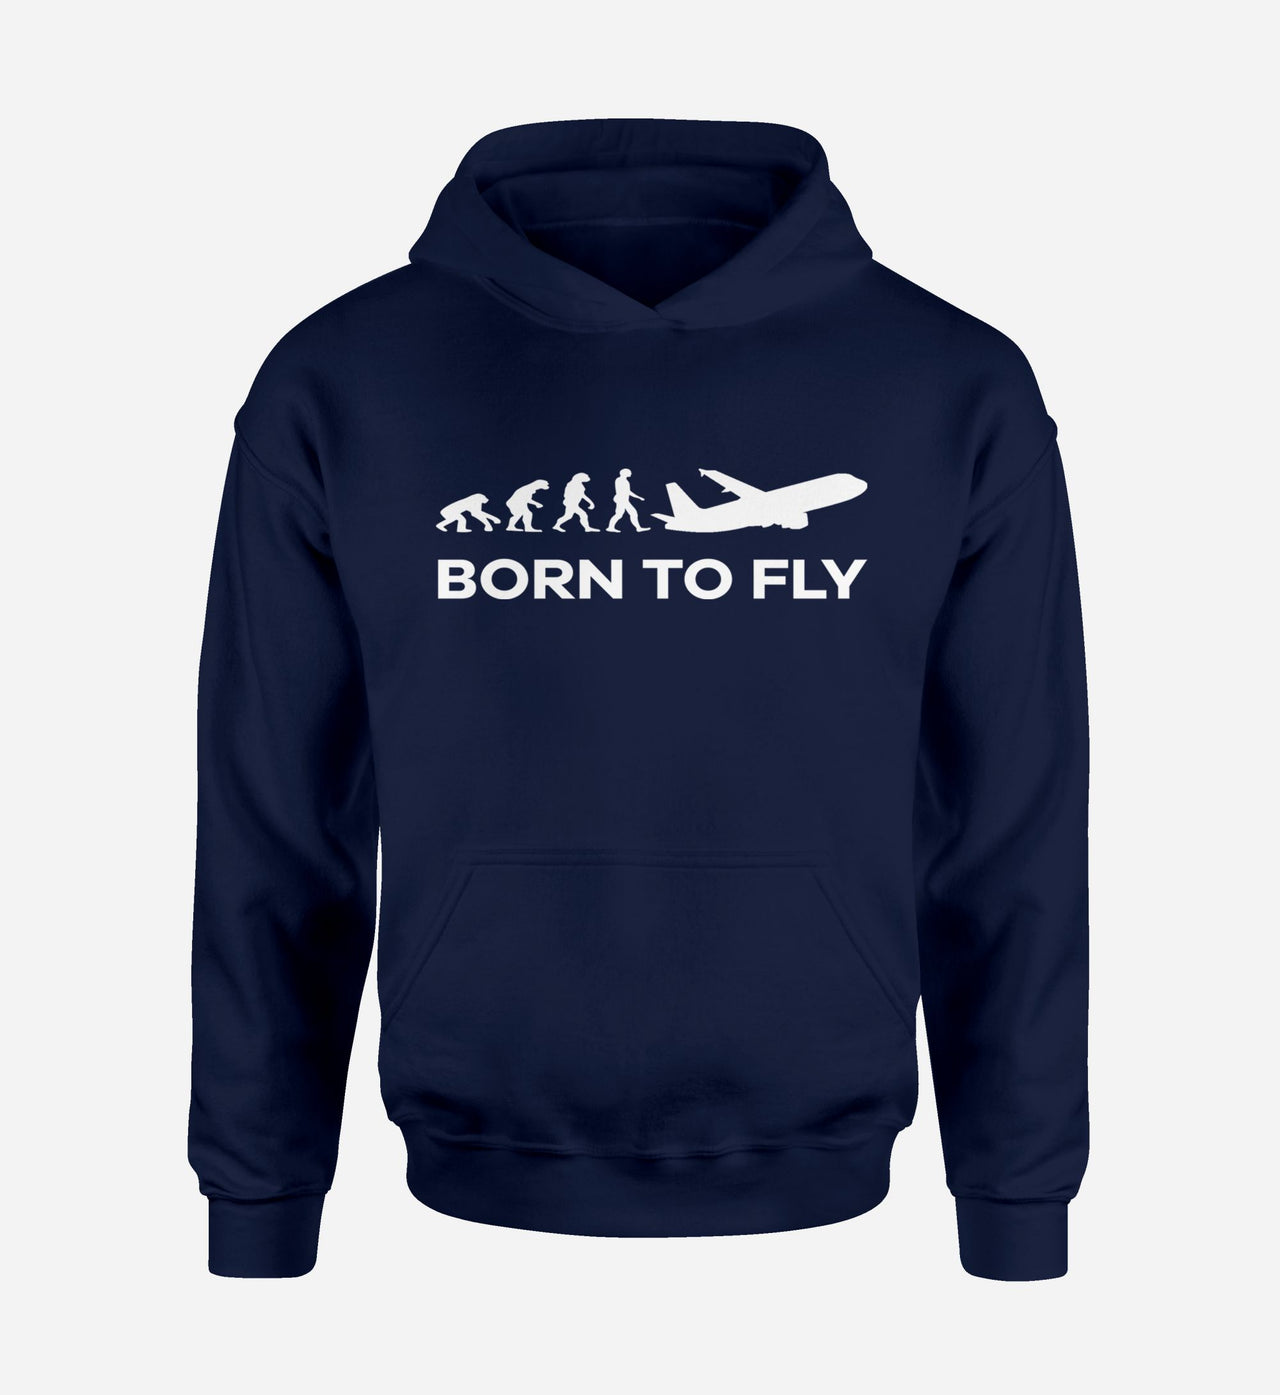 Born To Fly Designed Hoodies